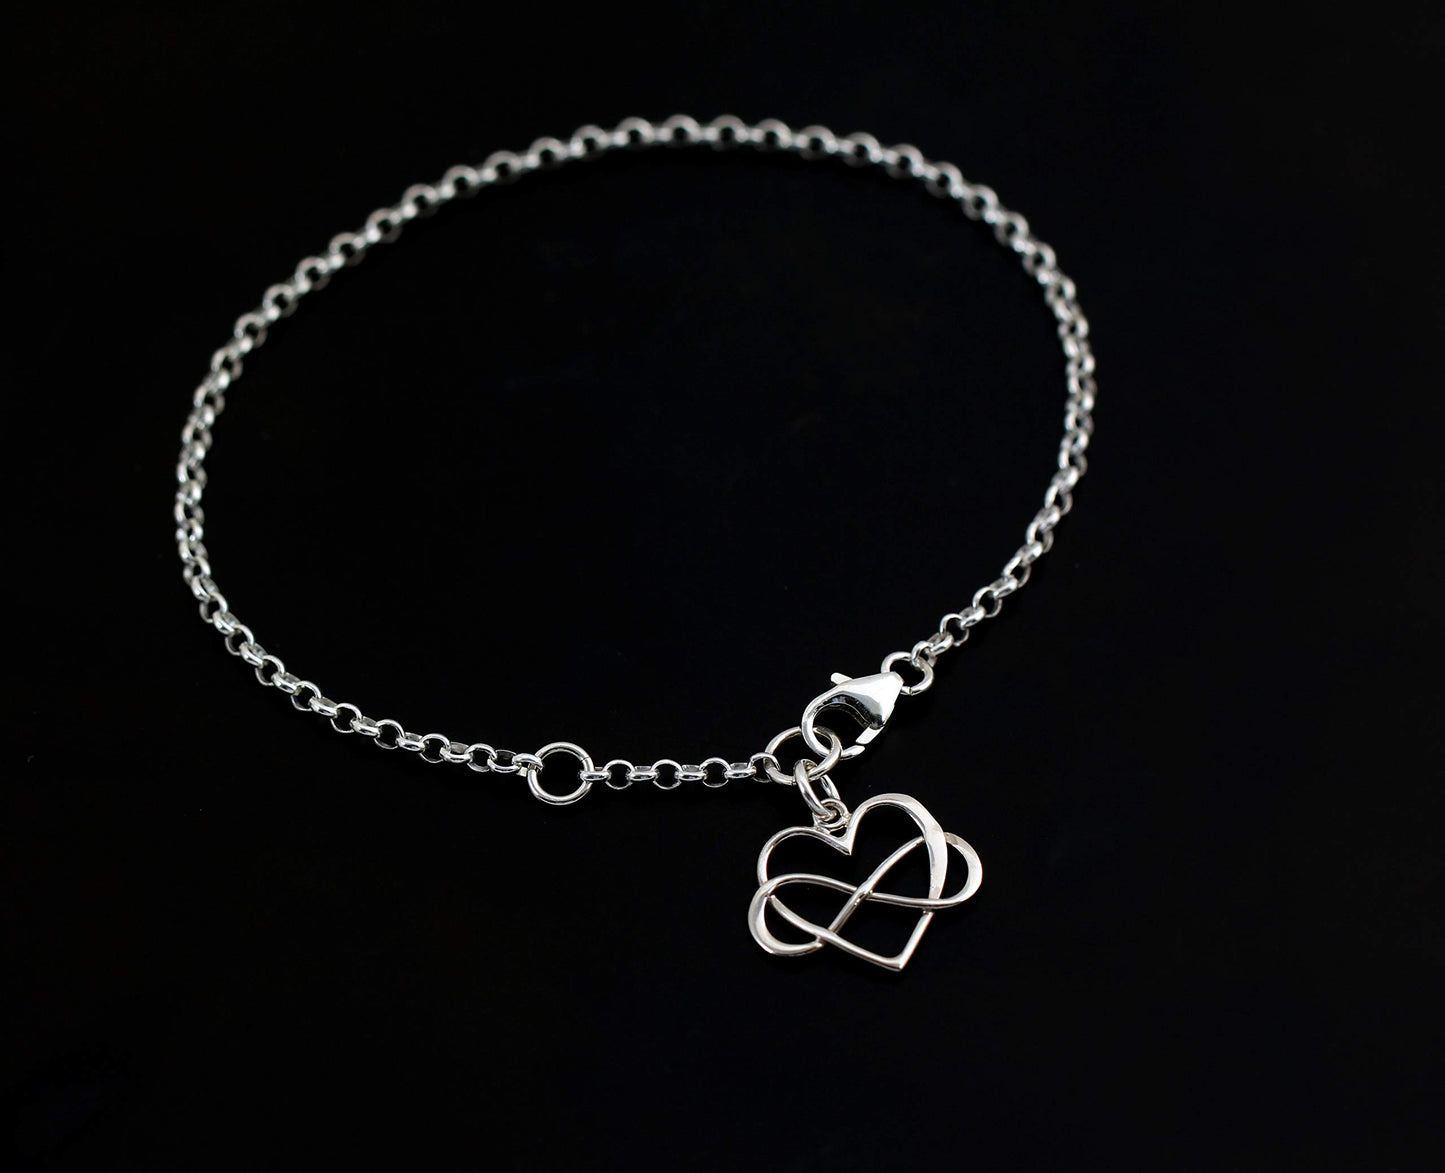 Stepdaughter Gift for Women Girls • Handmade Sterling Silver Infinity Heart • Infinite Love Bracelet • Gifts for Step Daughter from Stepmom Stepdad • Intentional Meaningful Jewelry from Mom Dad